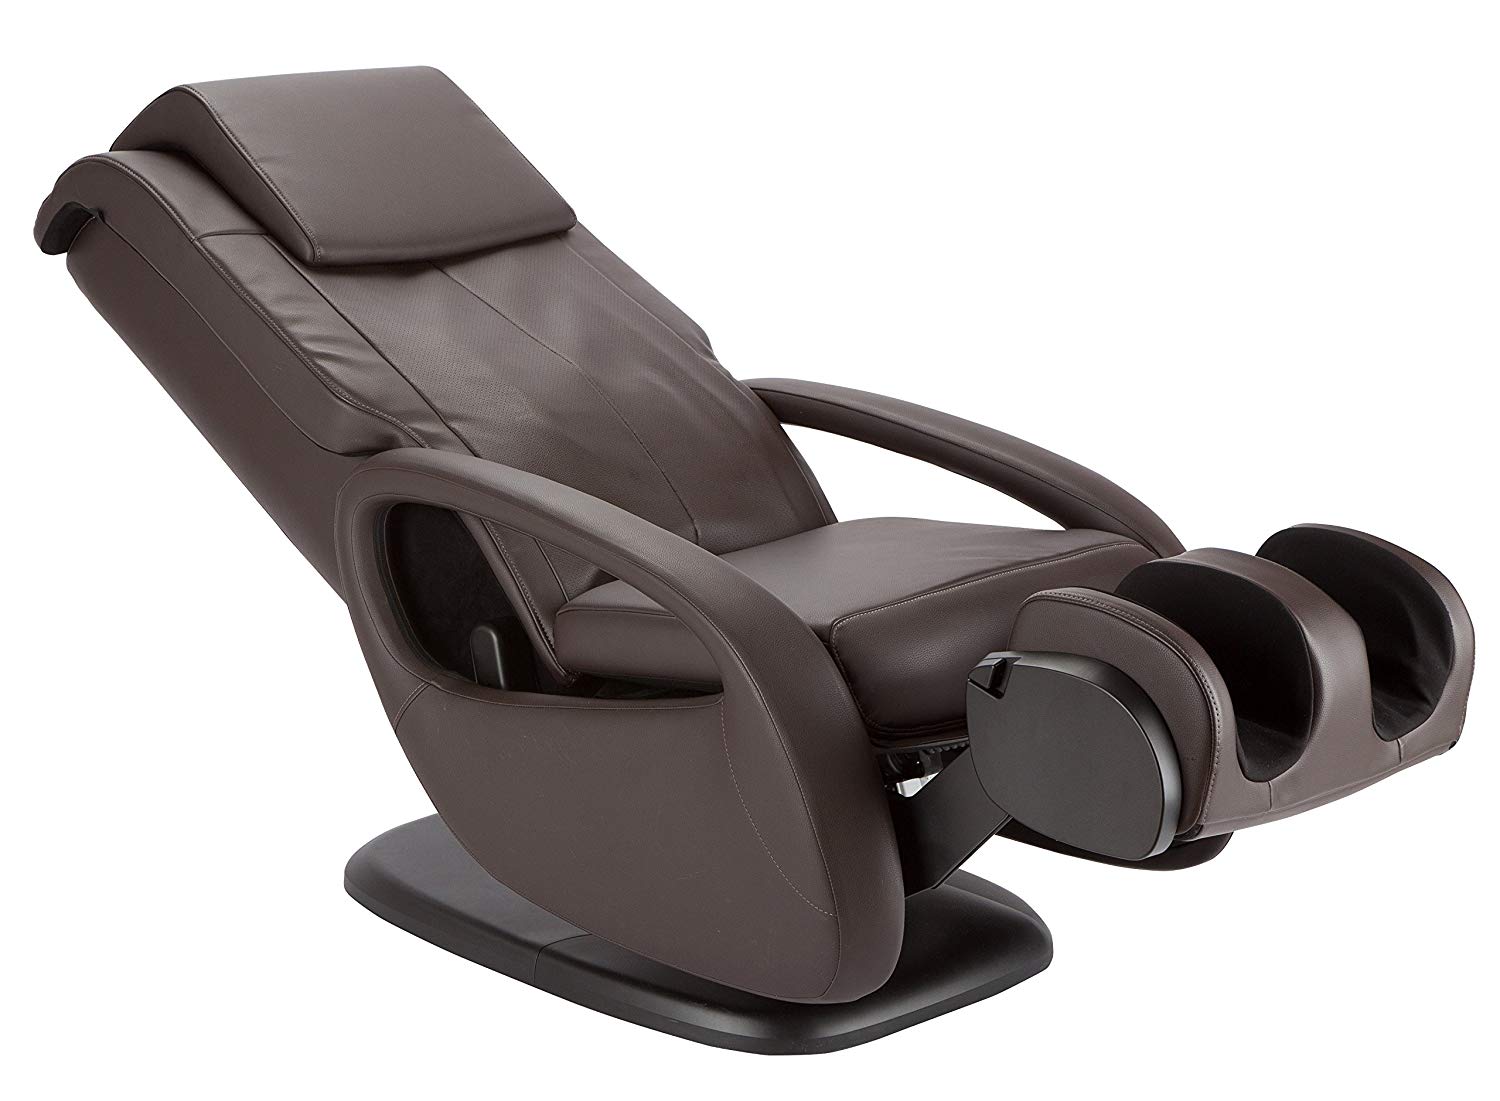 Human Touch WholeBody Massage Chair